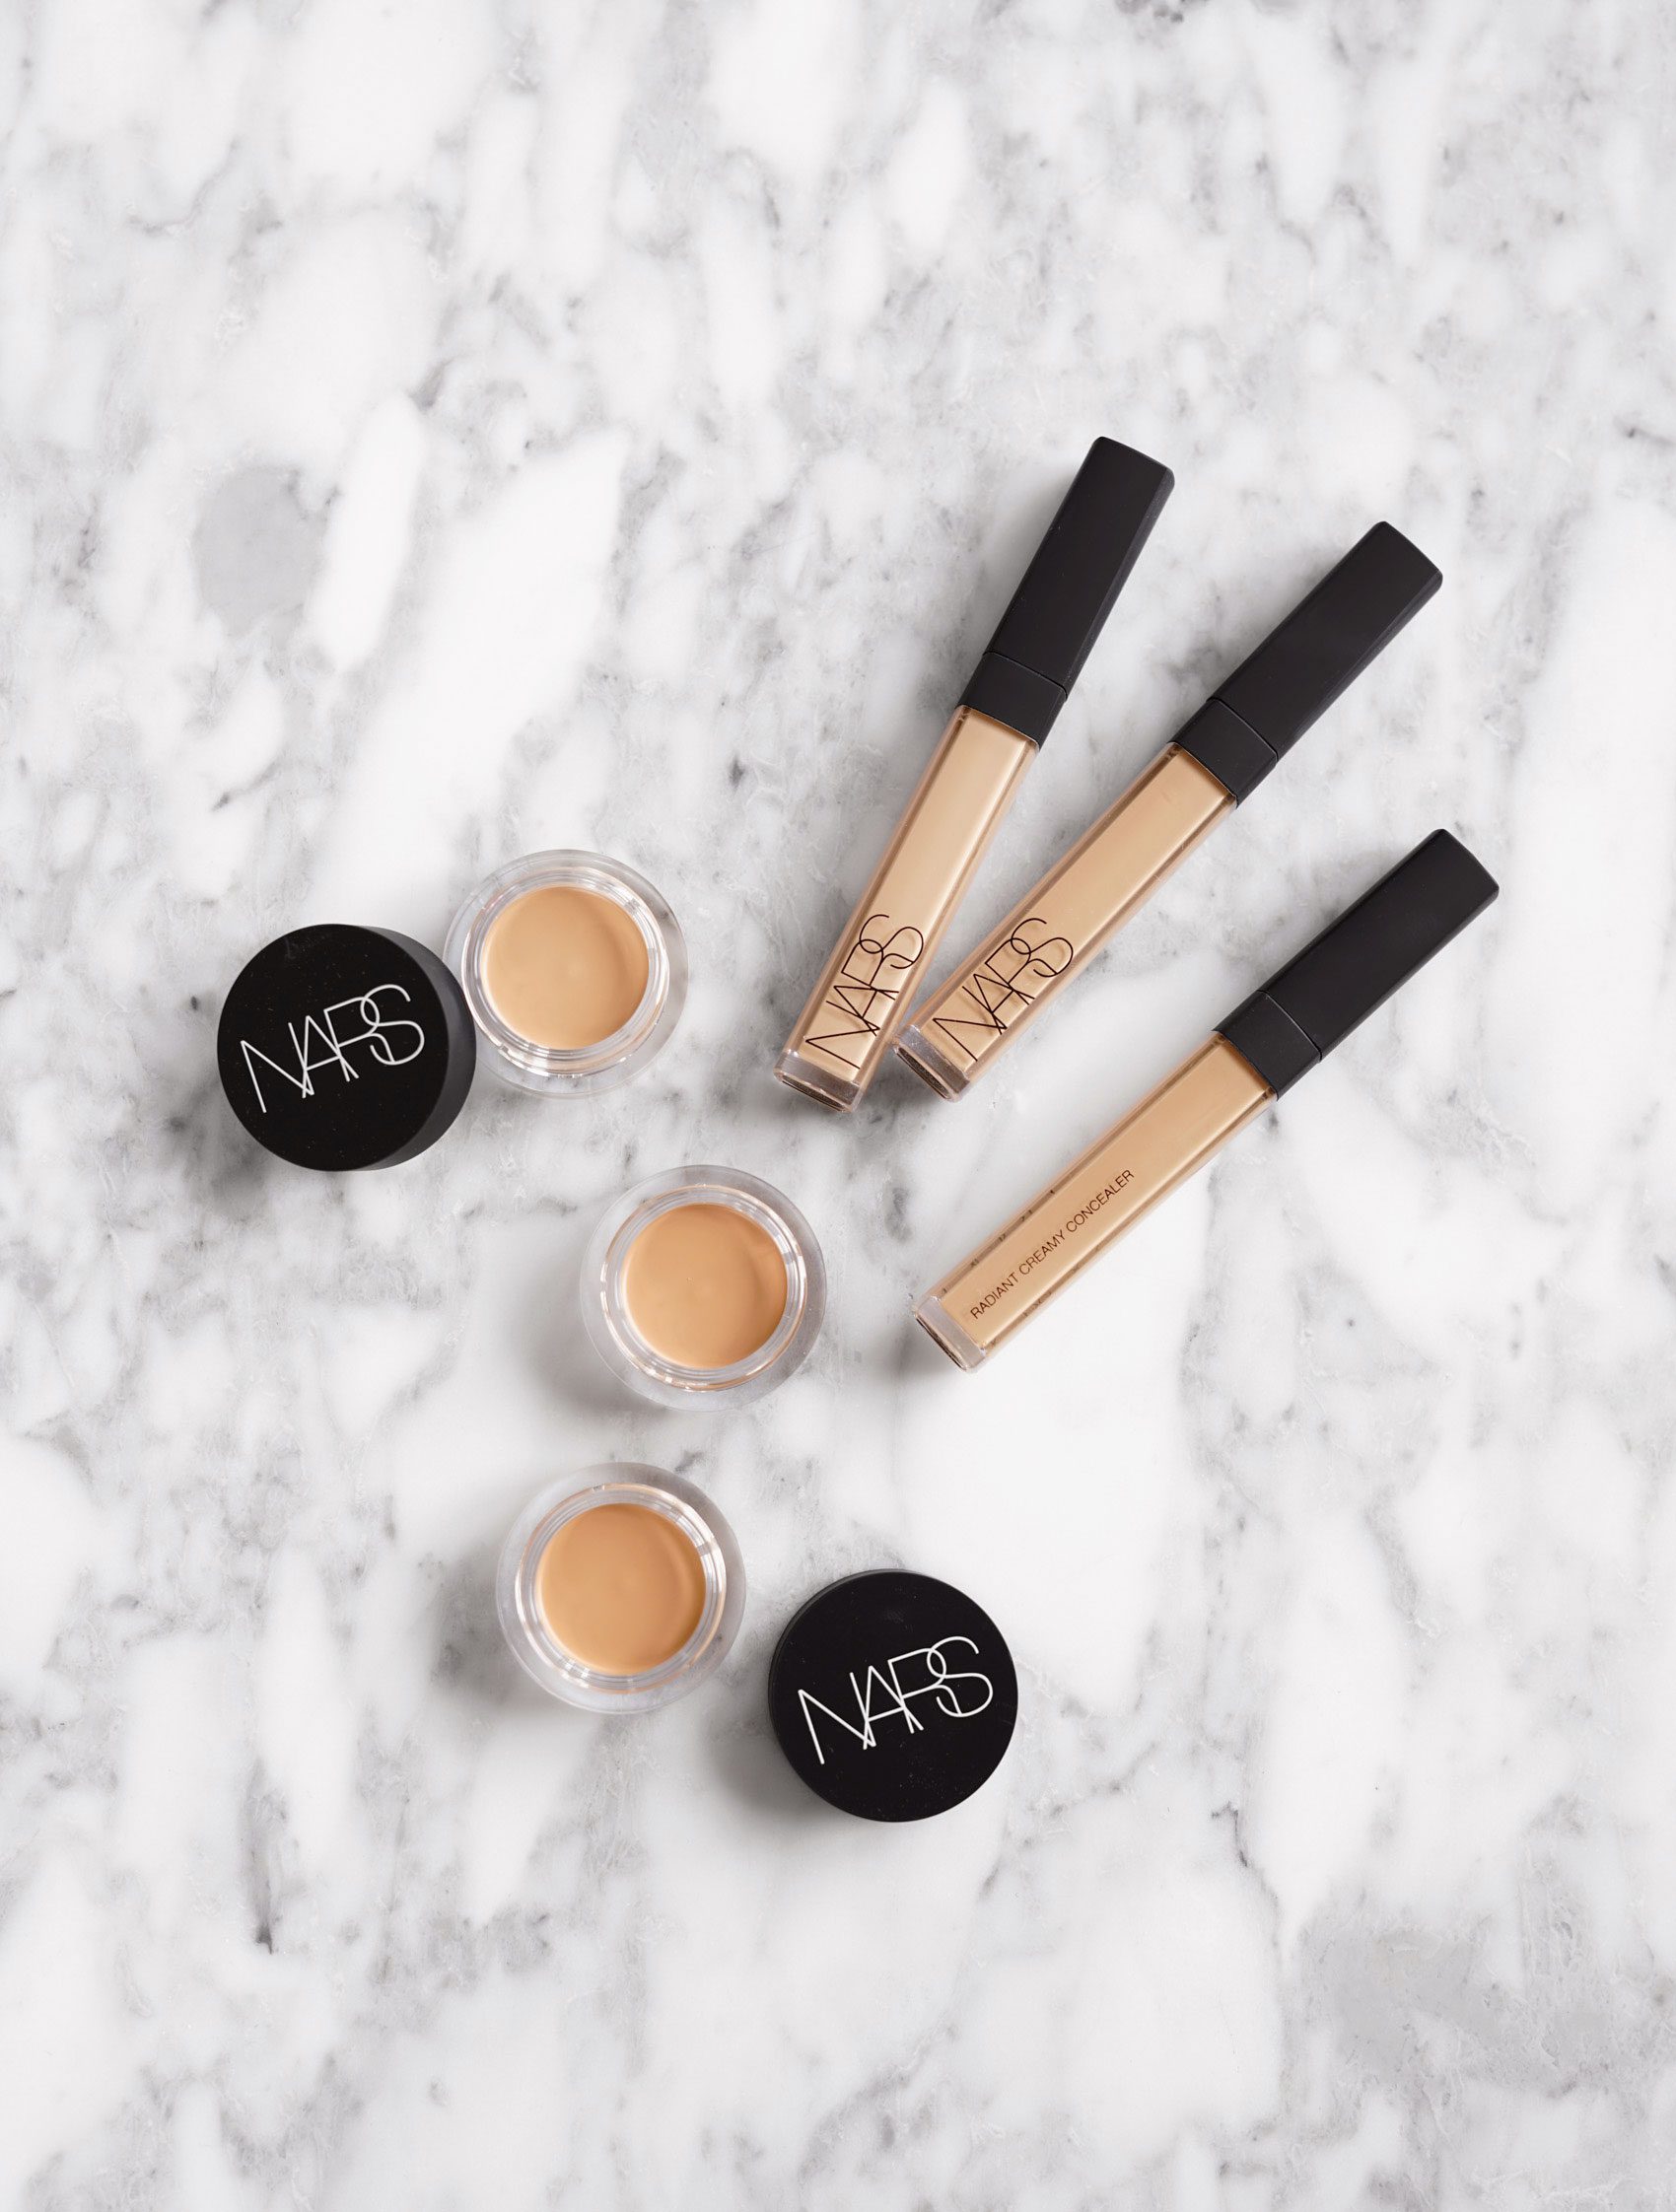 Is NARS Soft Matte Foundation As Good As The Concealer?